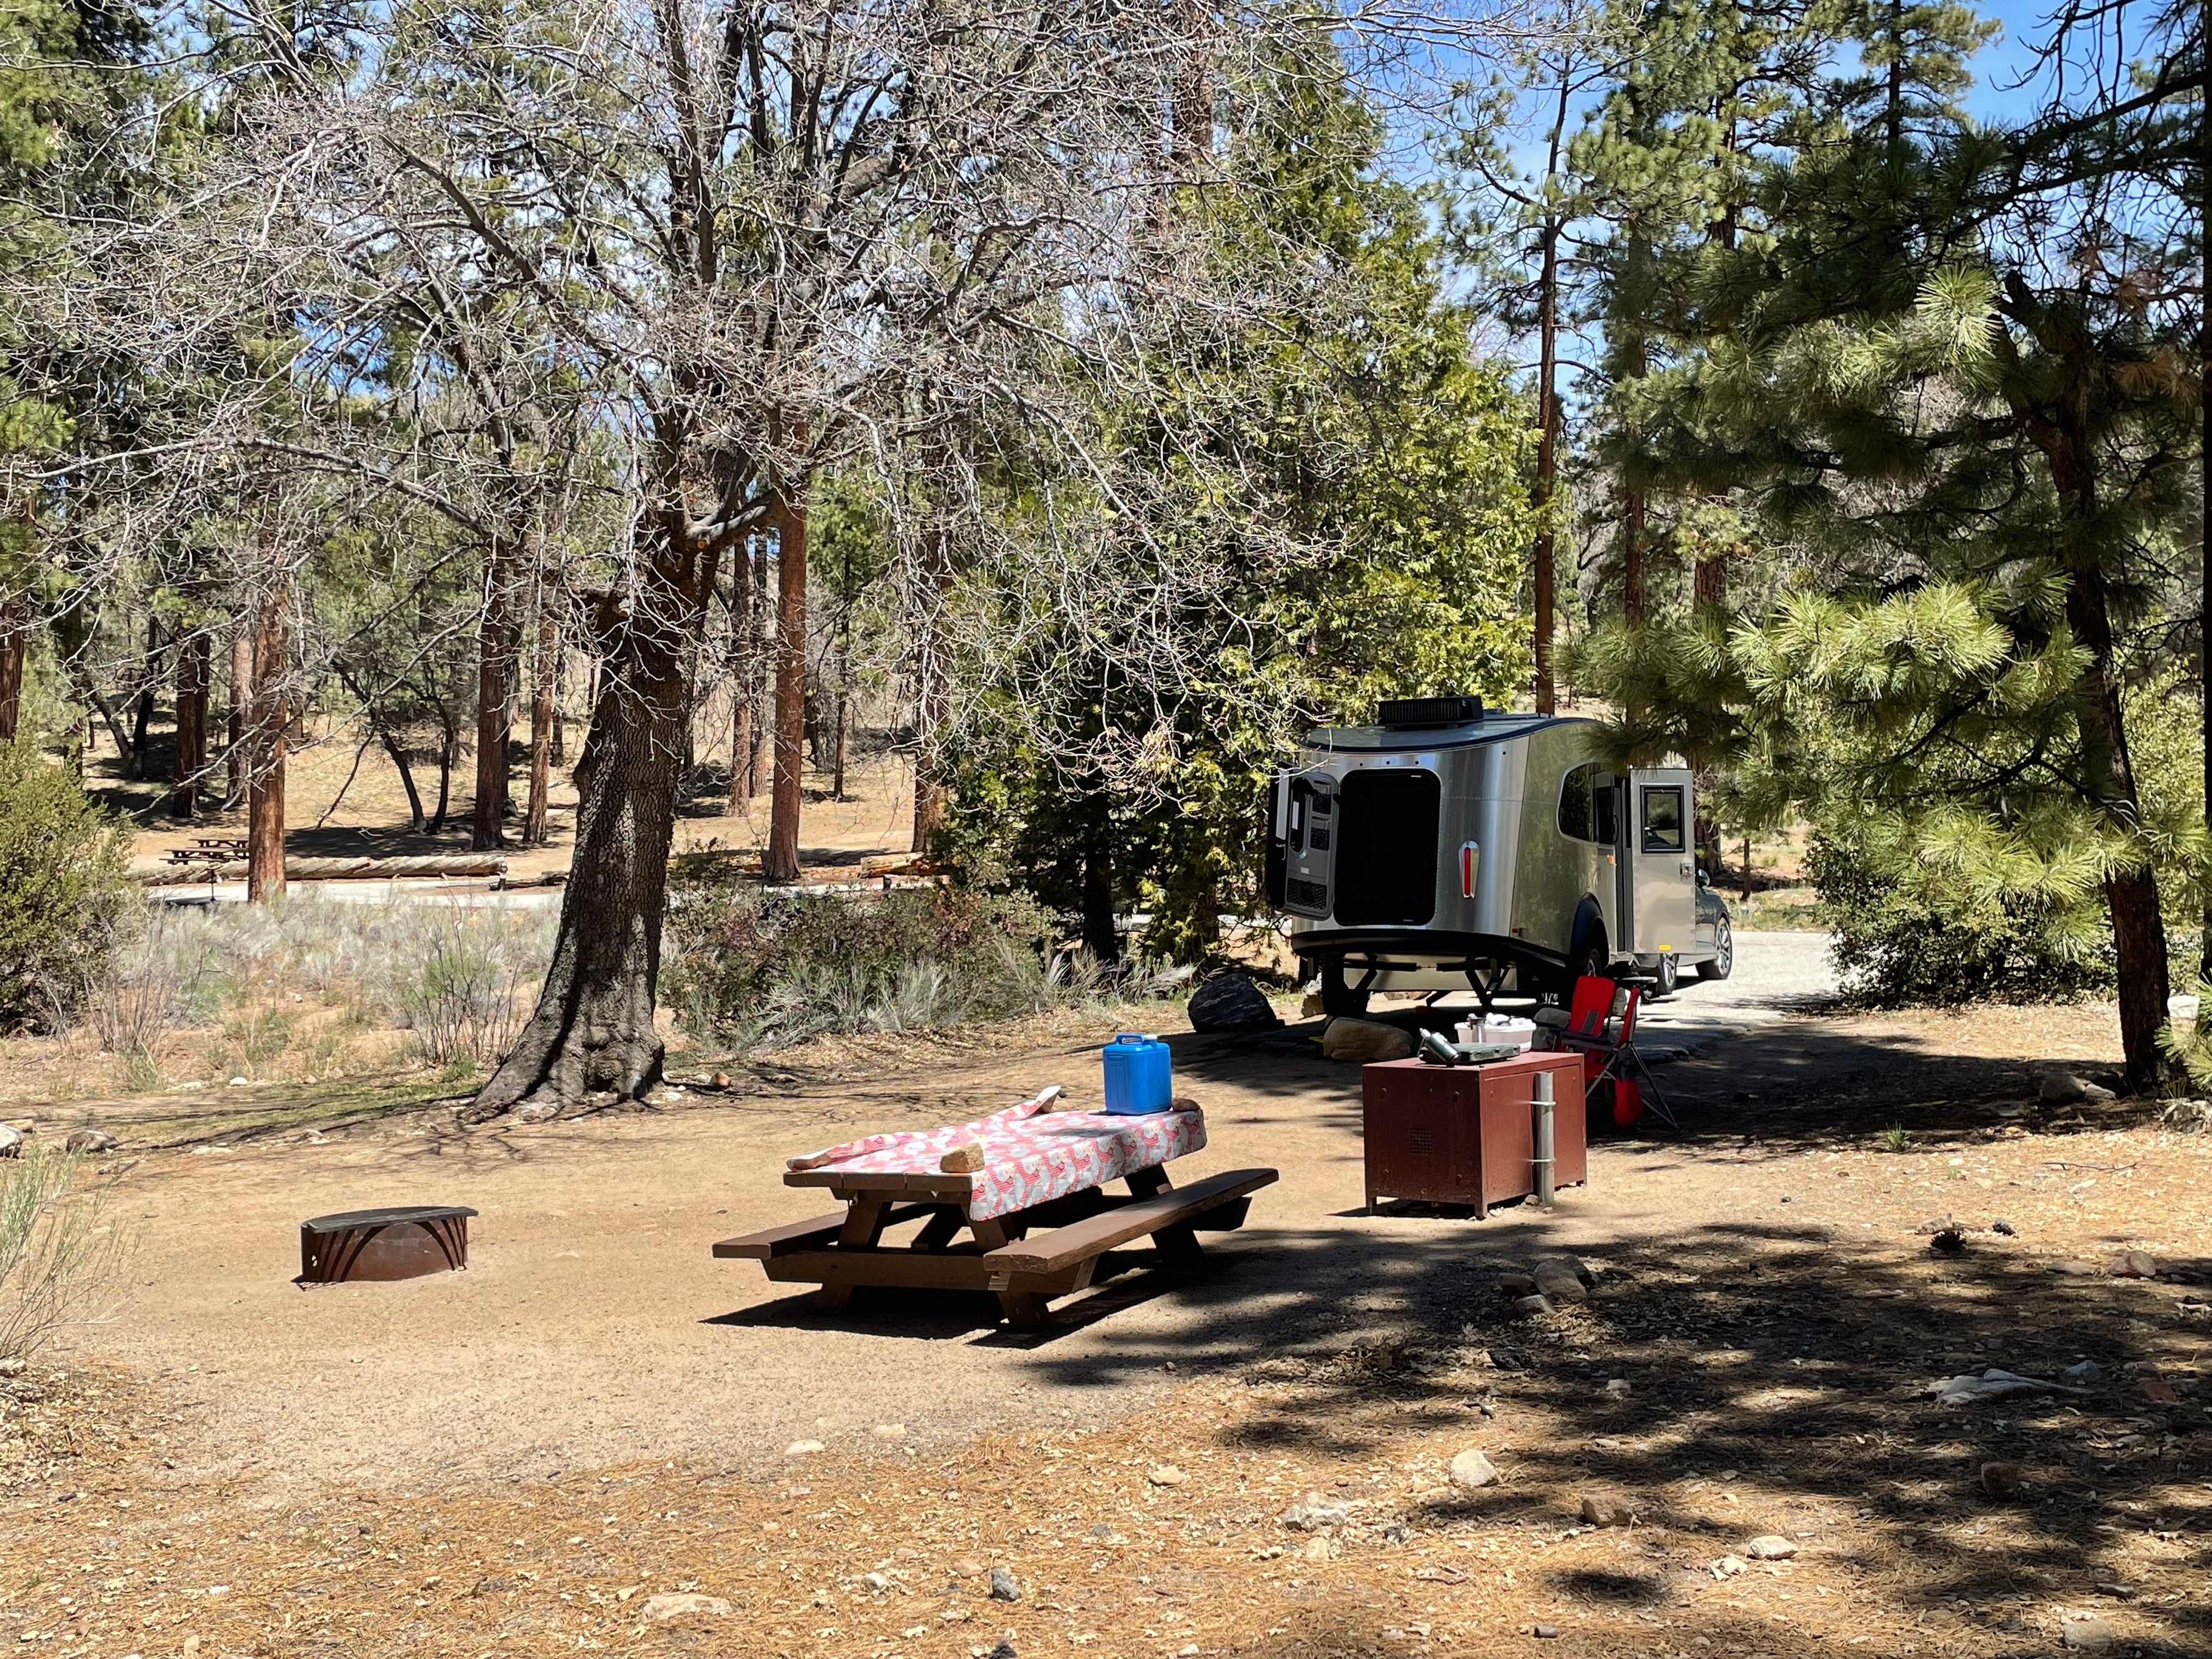 Camper submitted image from Barton Flats Campground - 4